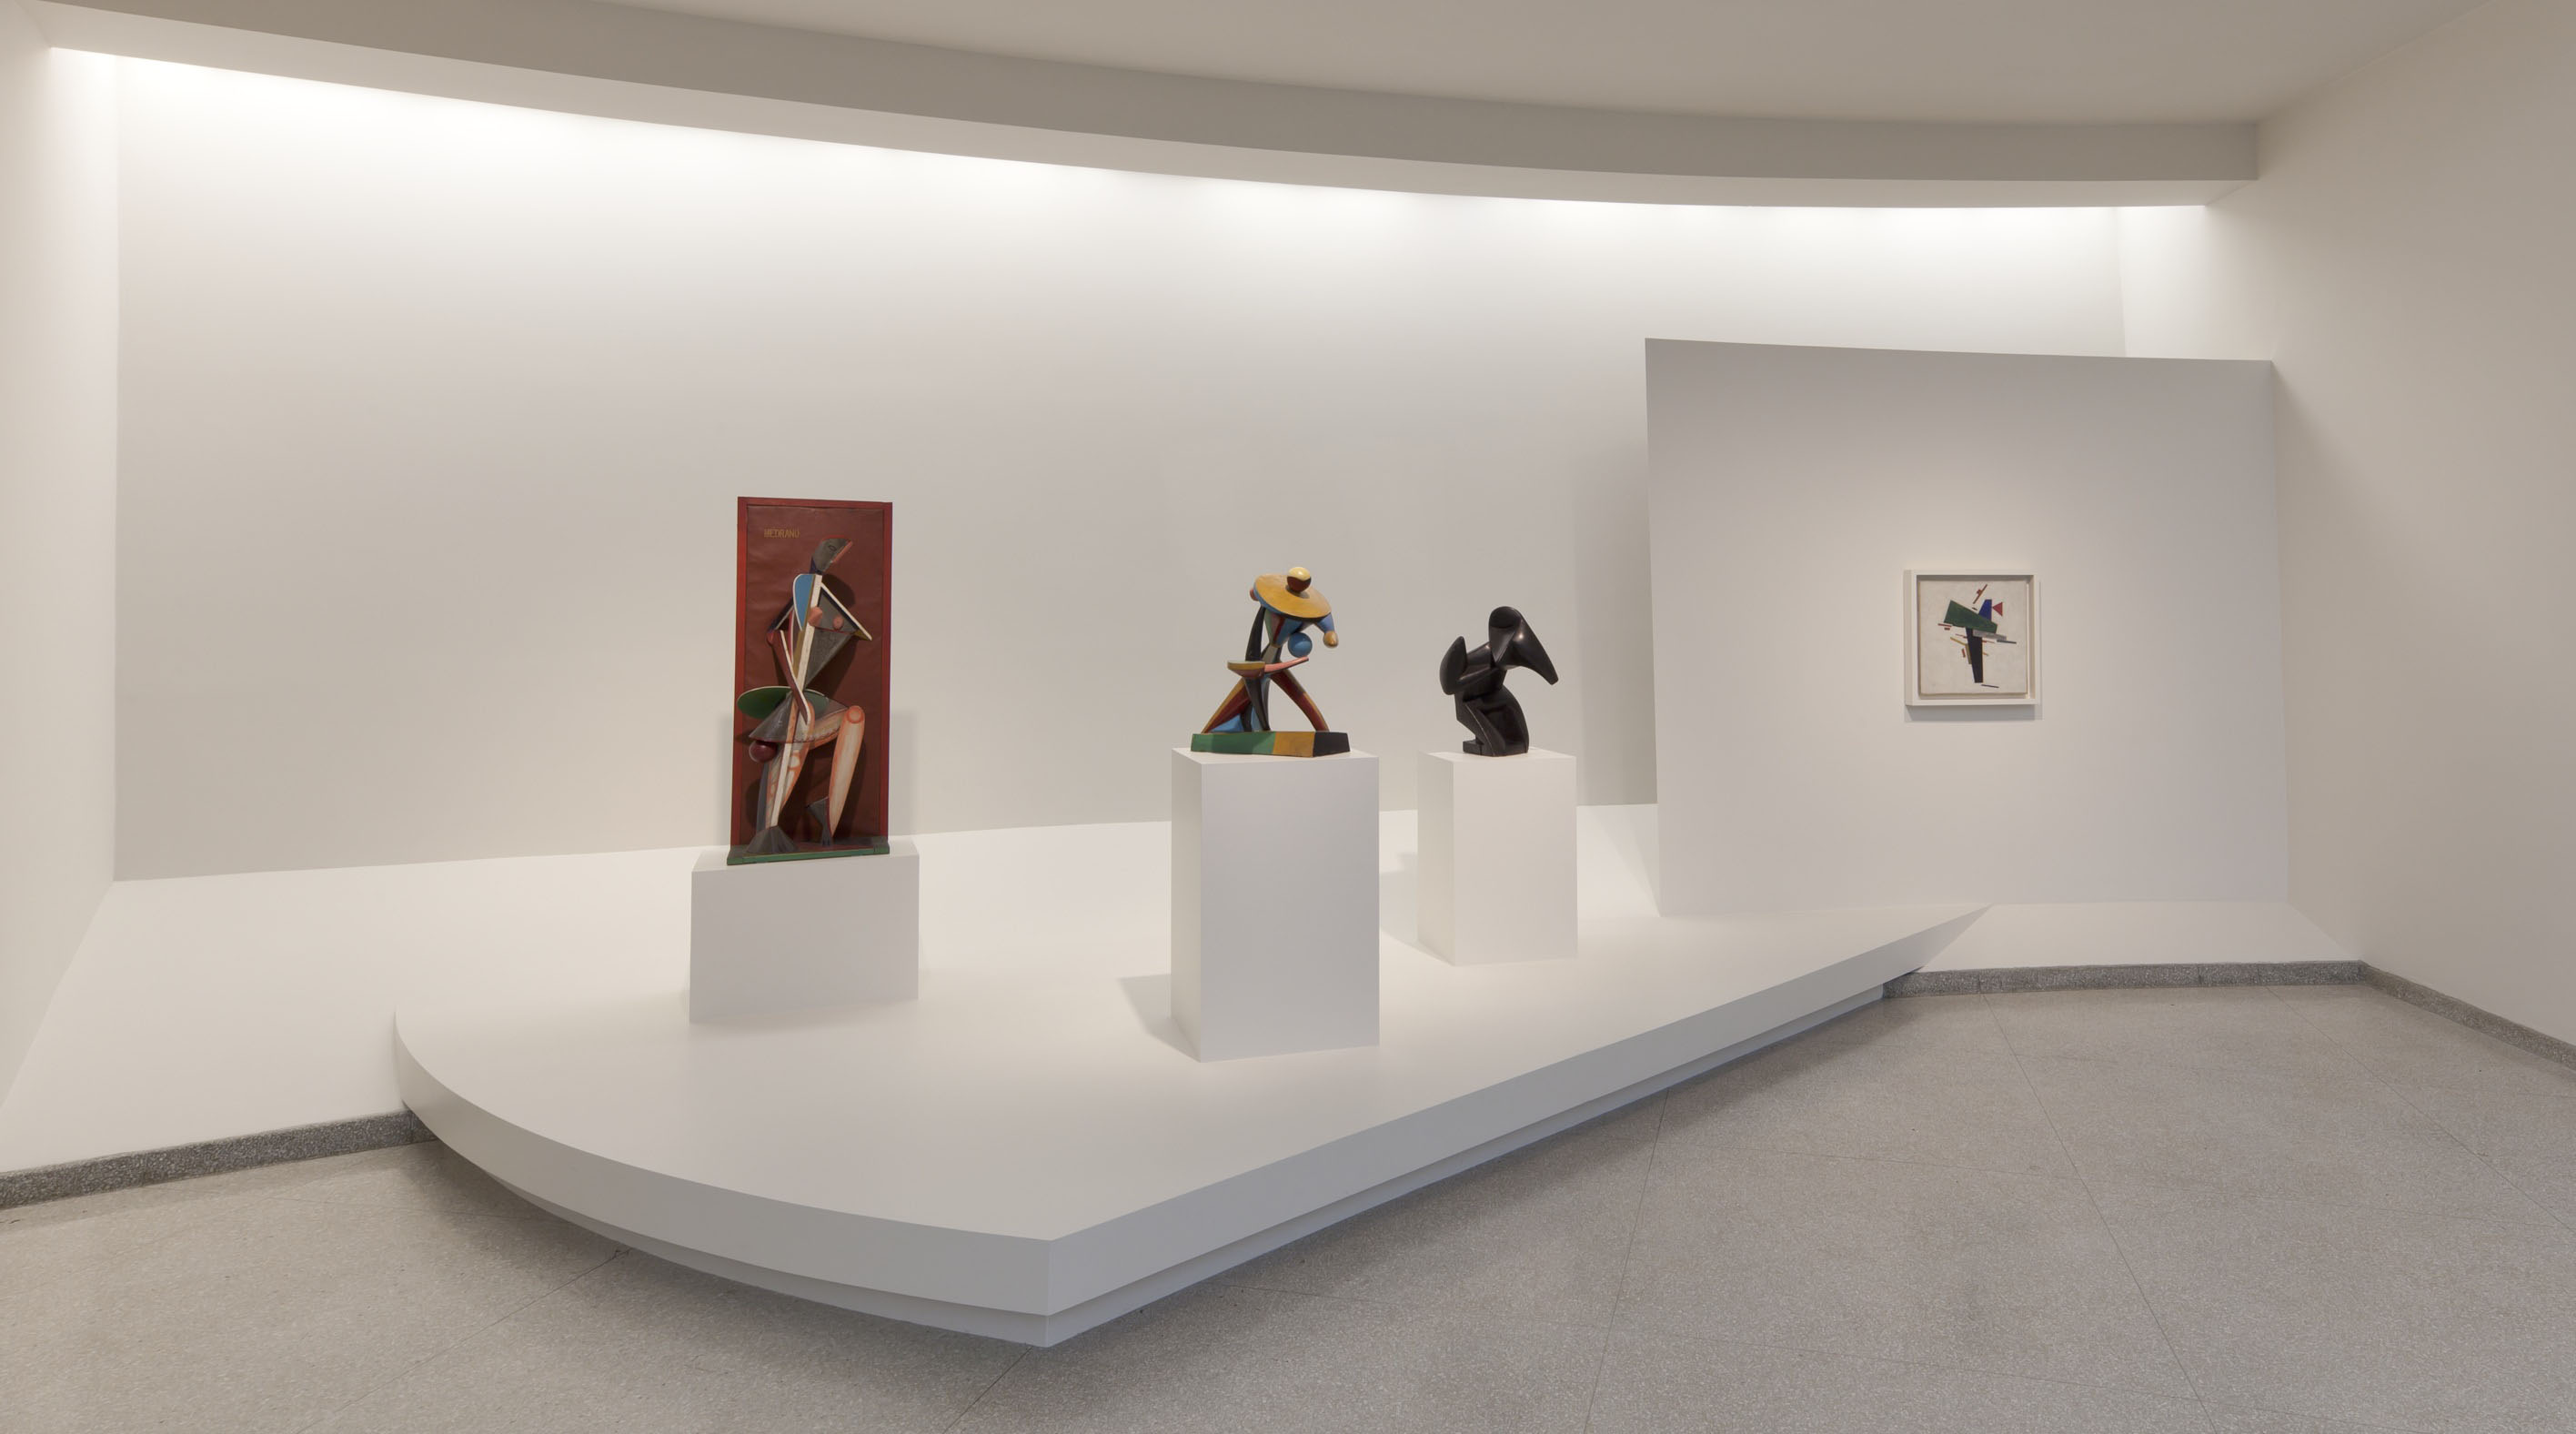 About the Collection | Guggenheim Museums and